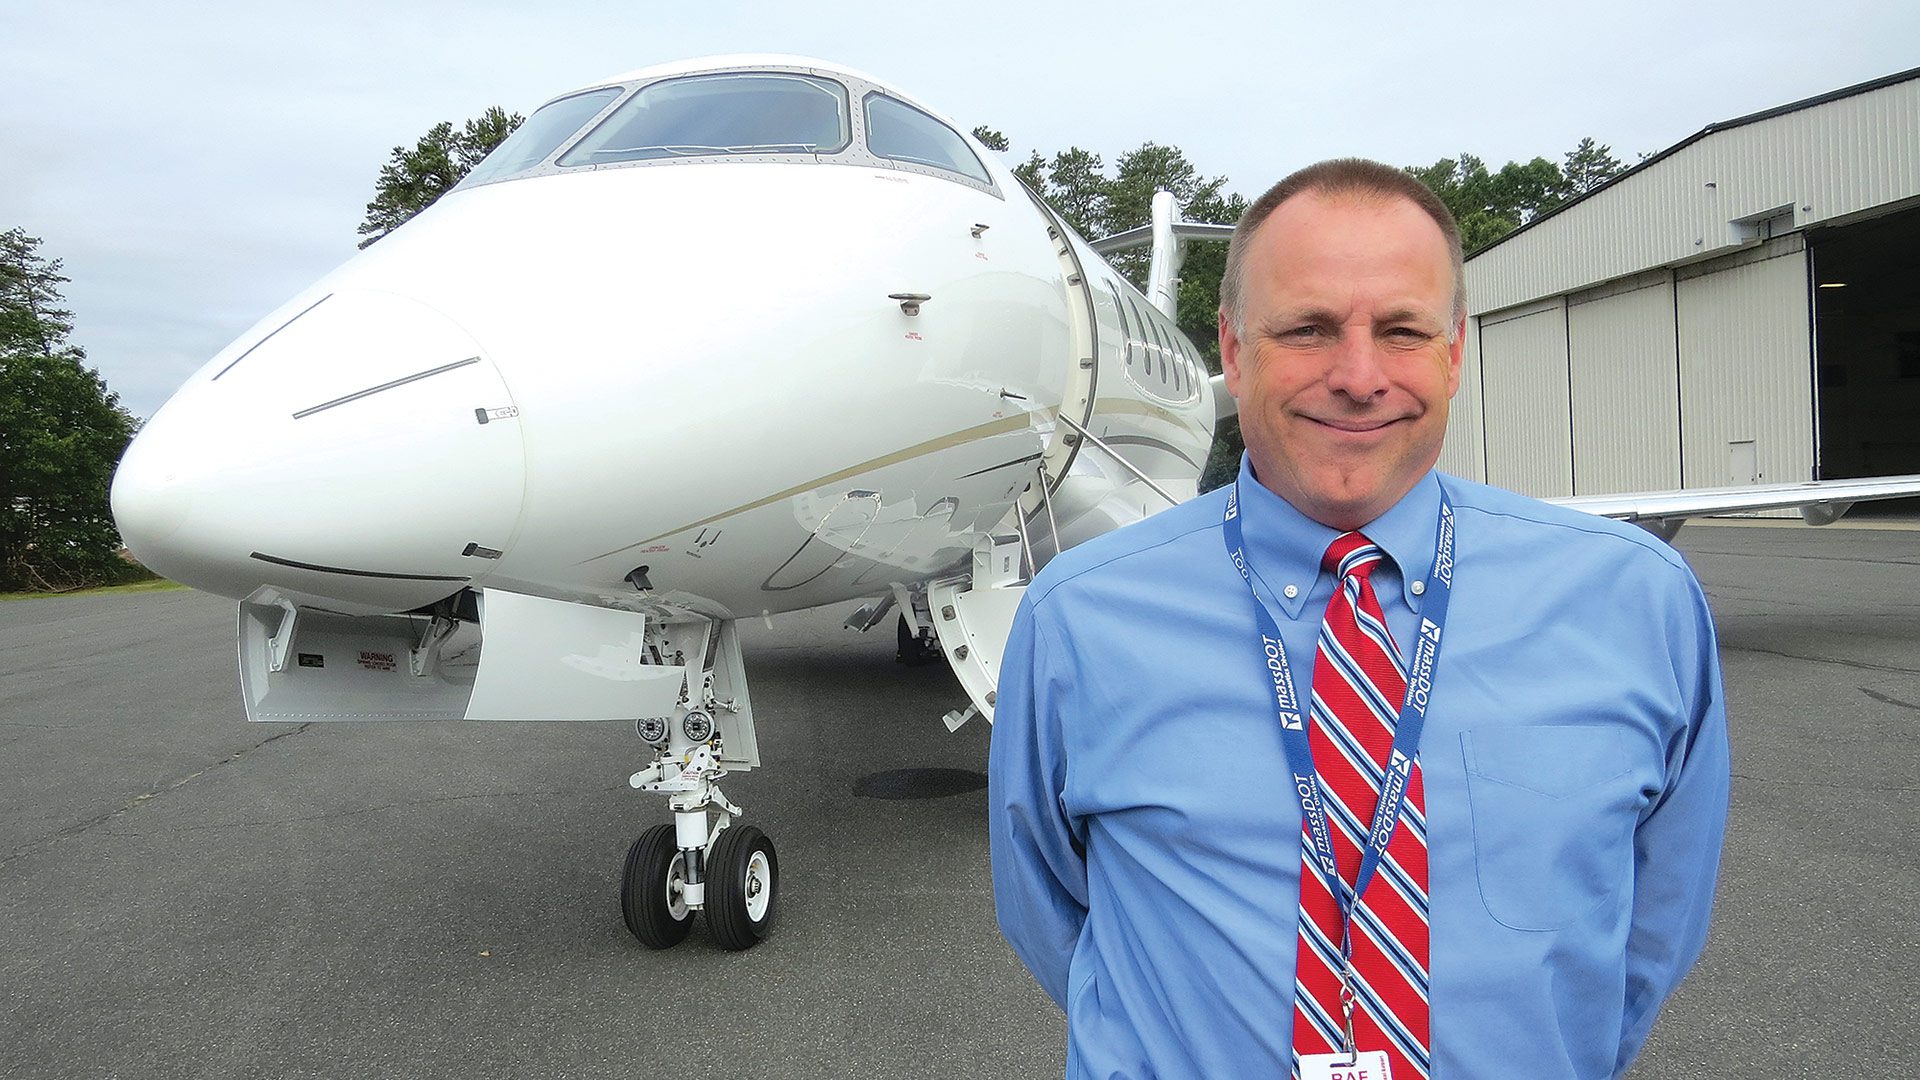 Chris Willenborg stands in front of one of the private jets